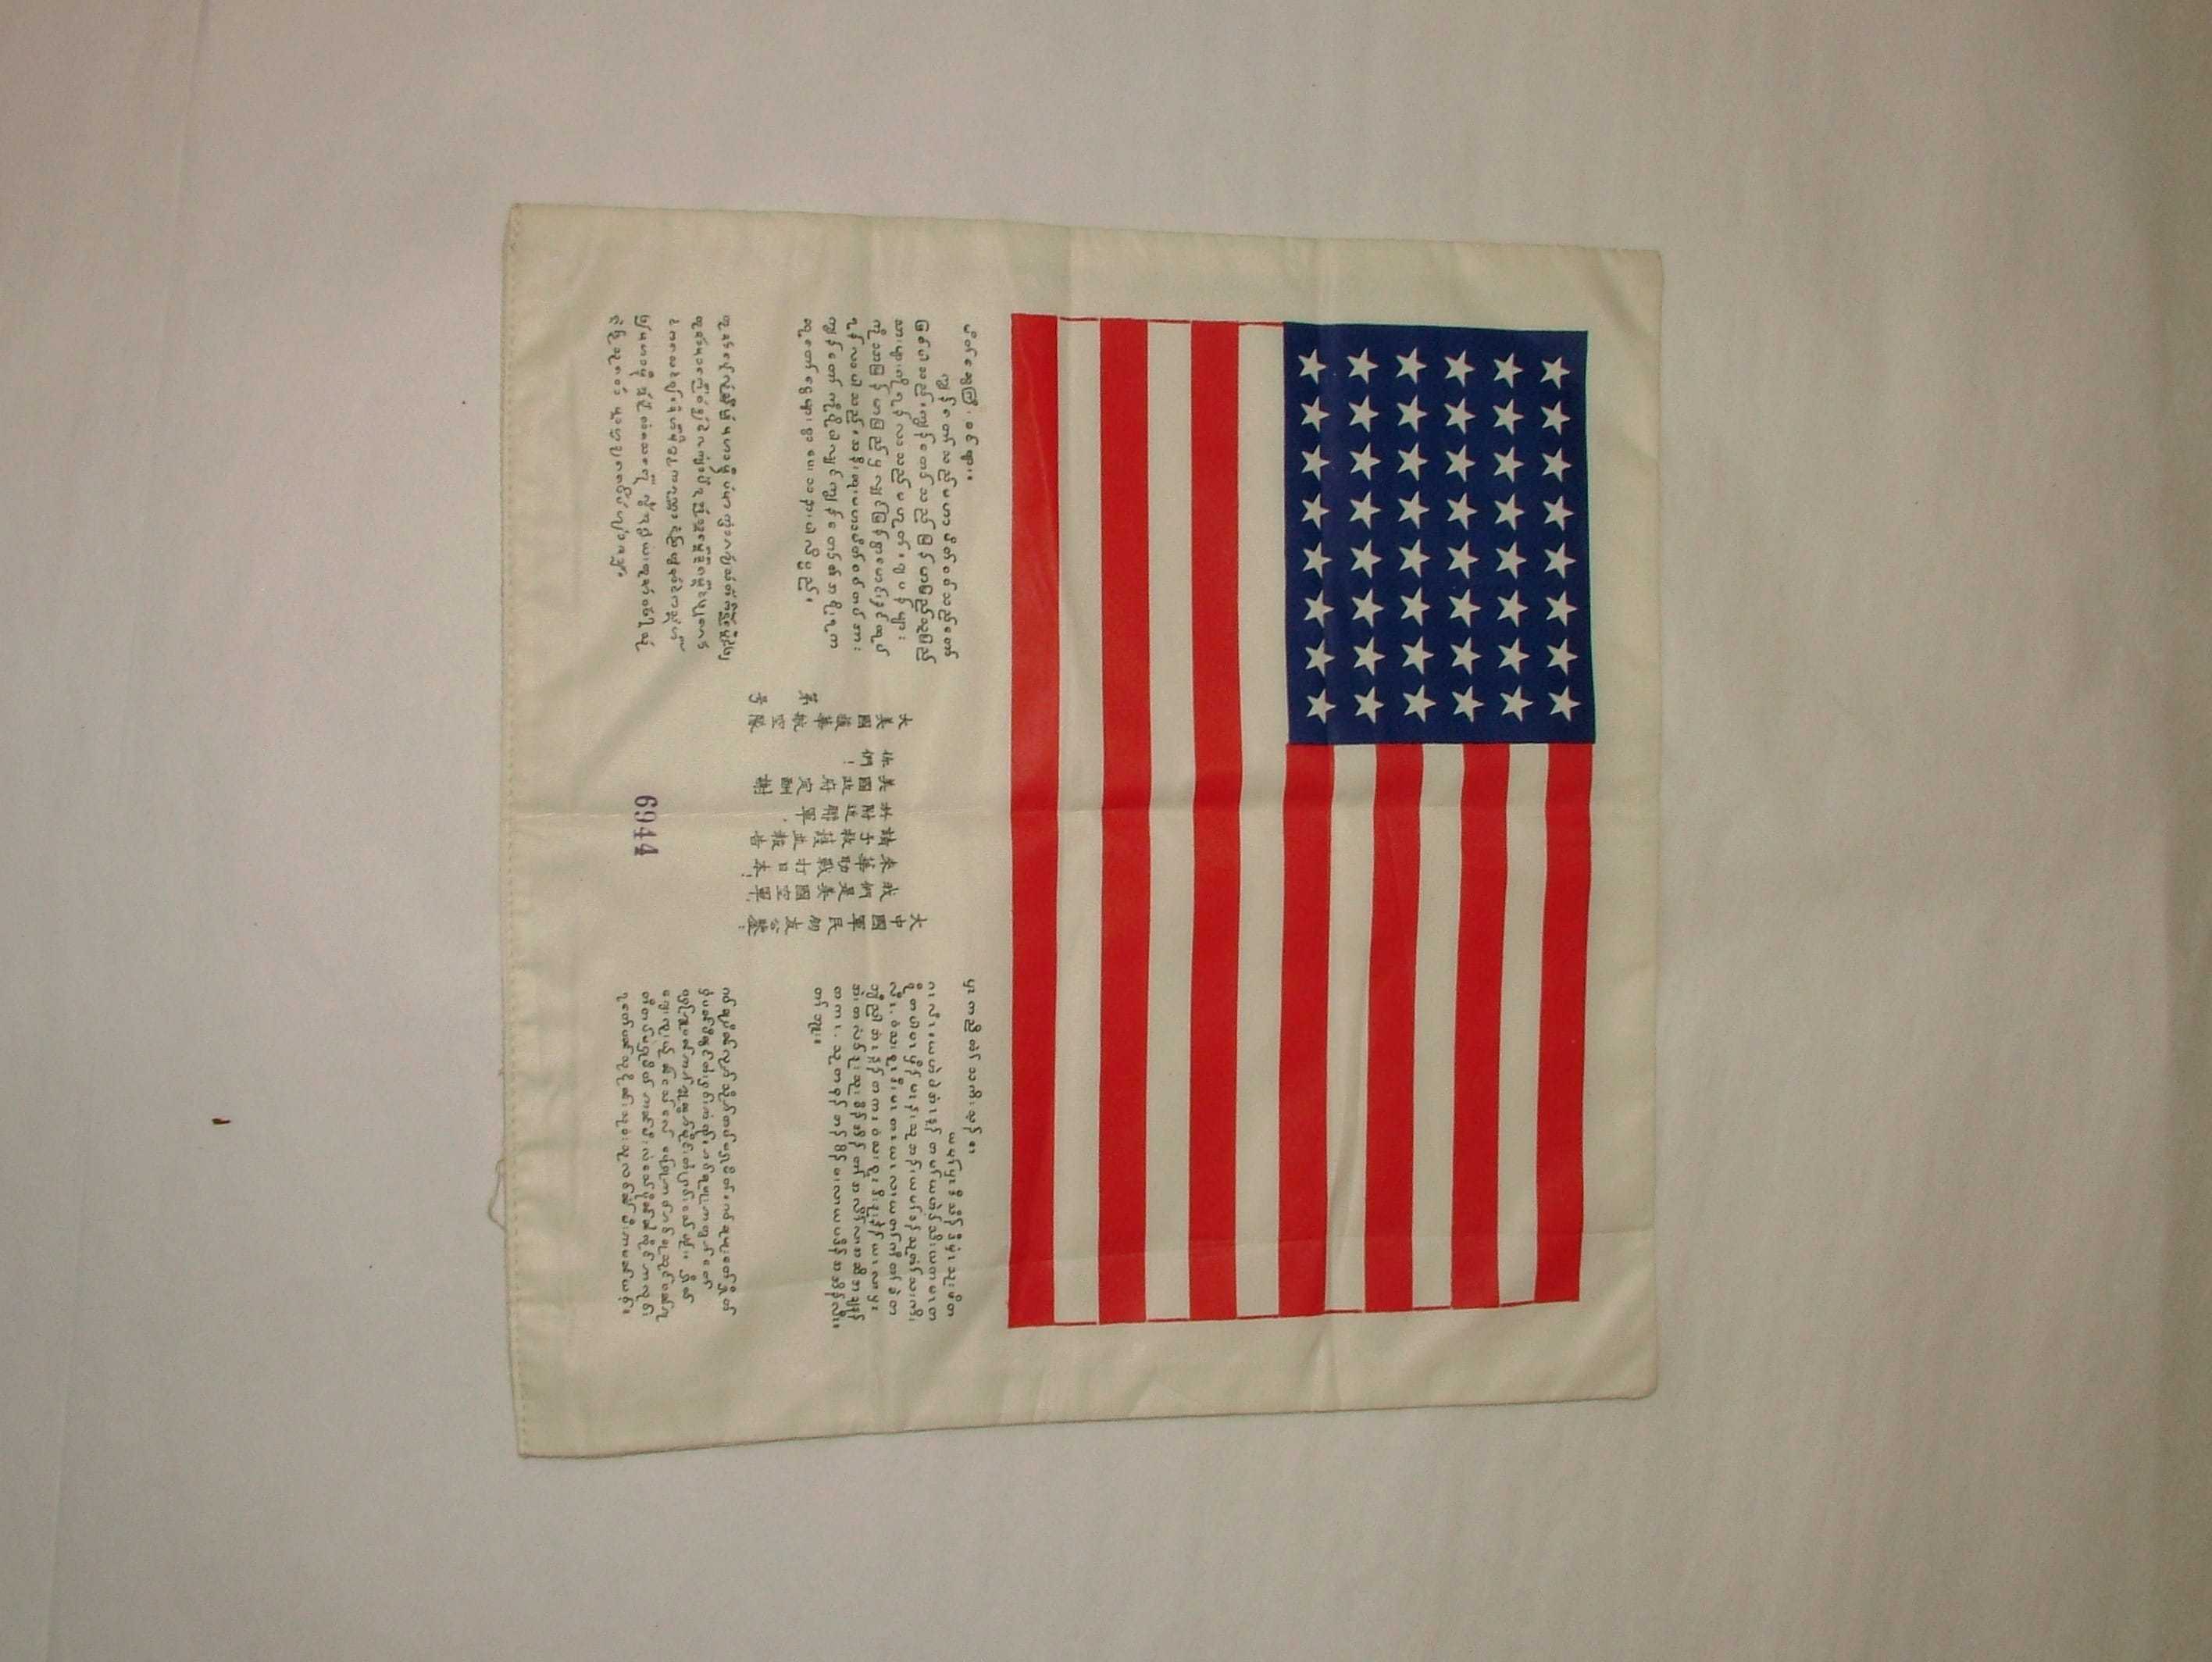 A piece of paper, with an American flag across the top and the same message in multiple languages beneath